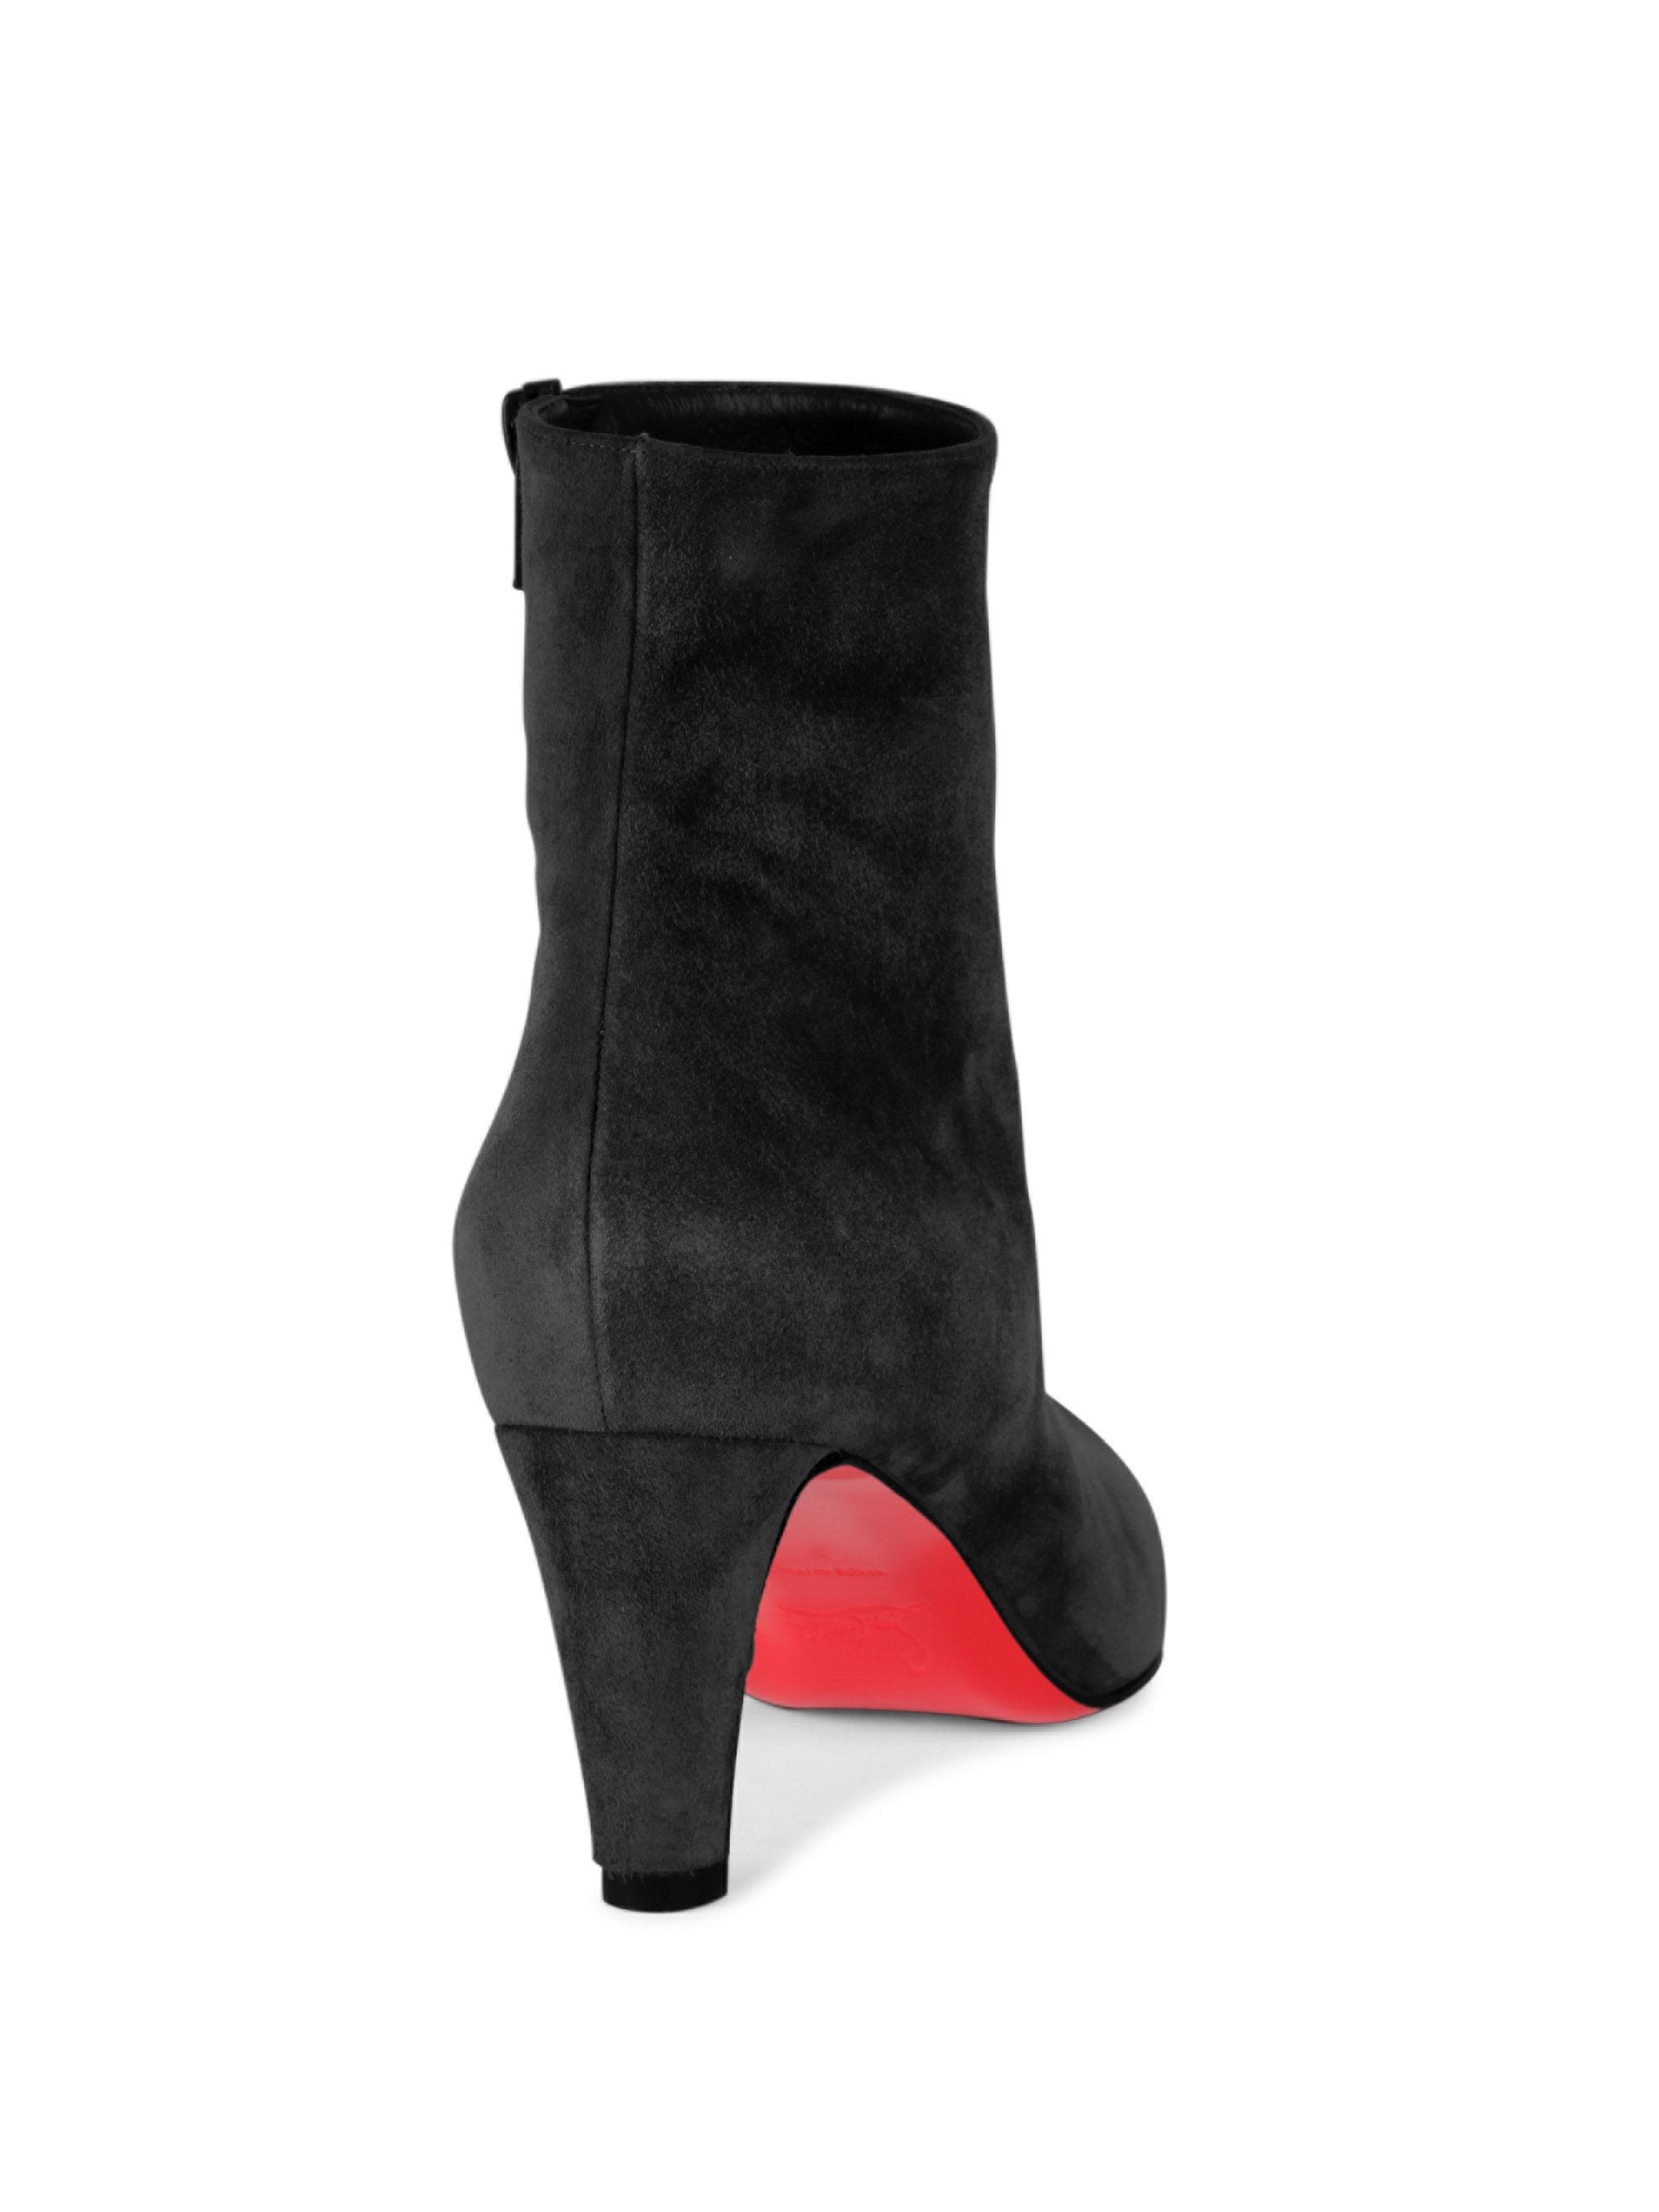 Christian Louboutin Top 70 Suede Booties in Black | Lyst